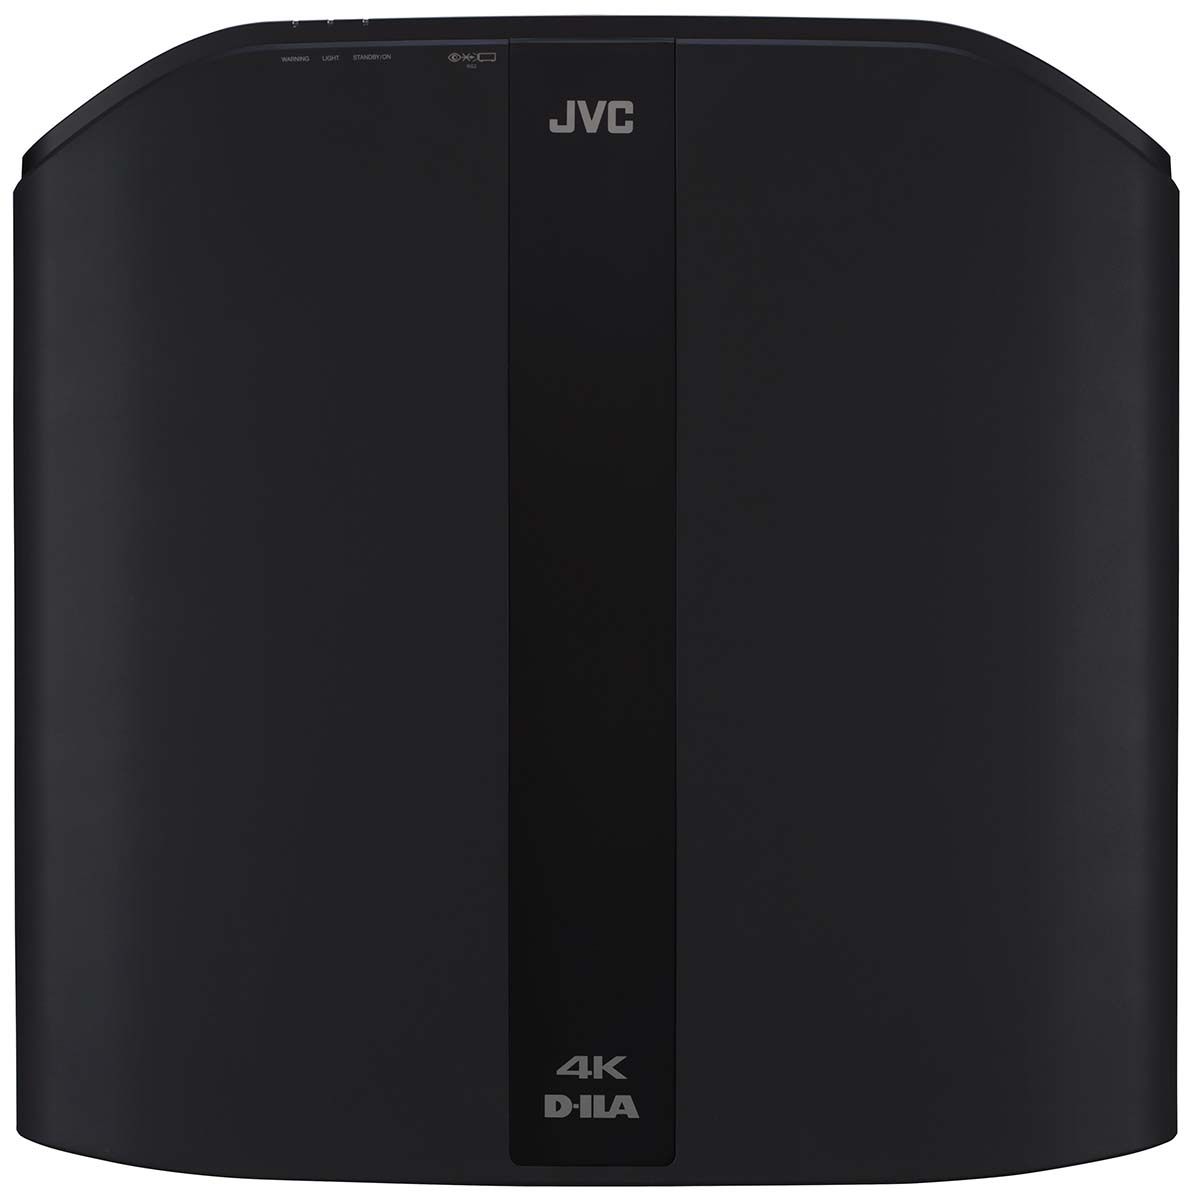 JVC DLA-NP5 4K Home Theater Projector, top view